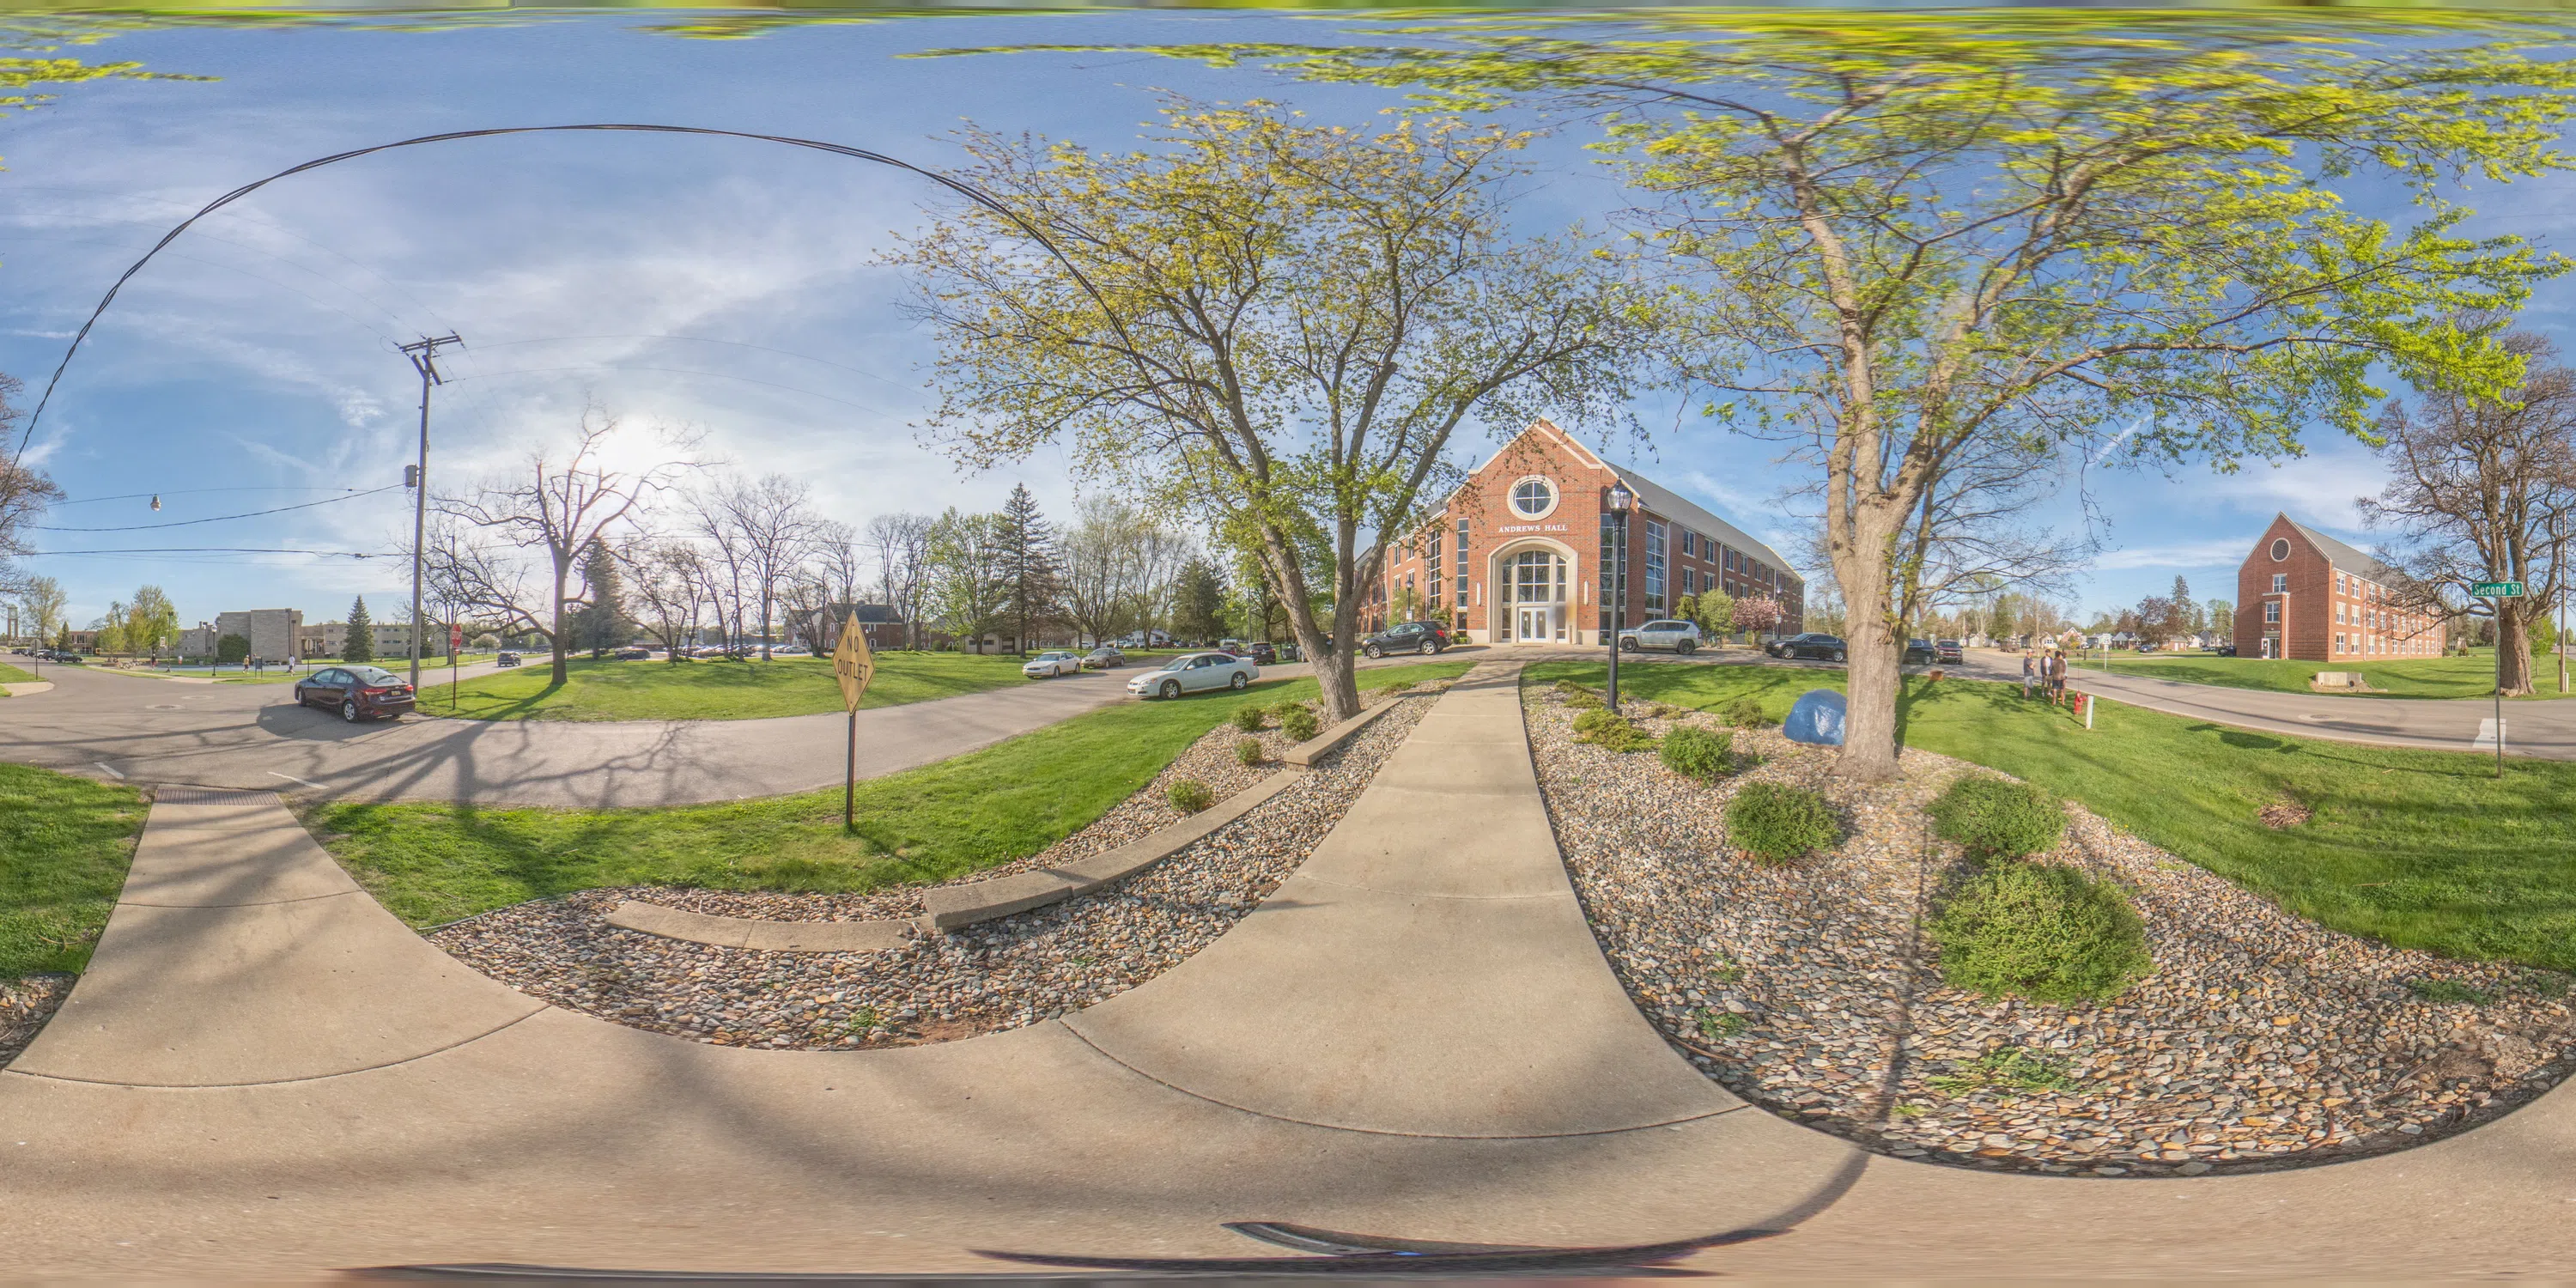 Panorama of the exterior of Andrews Hall